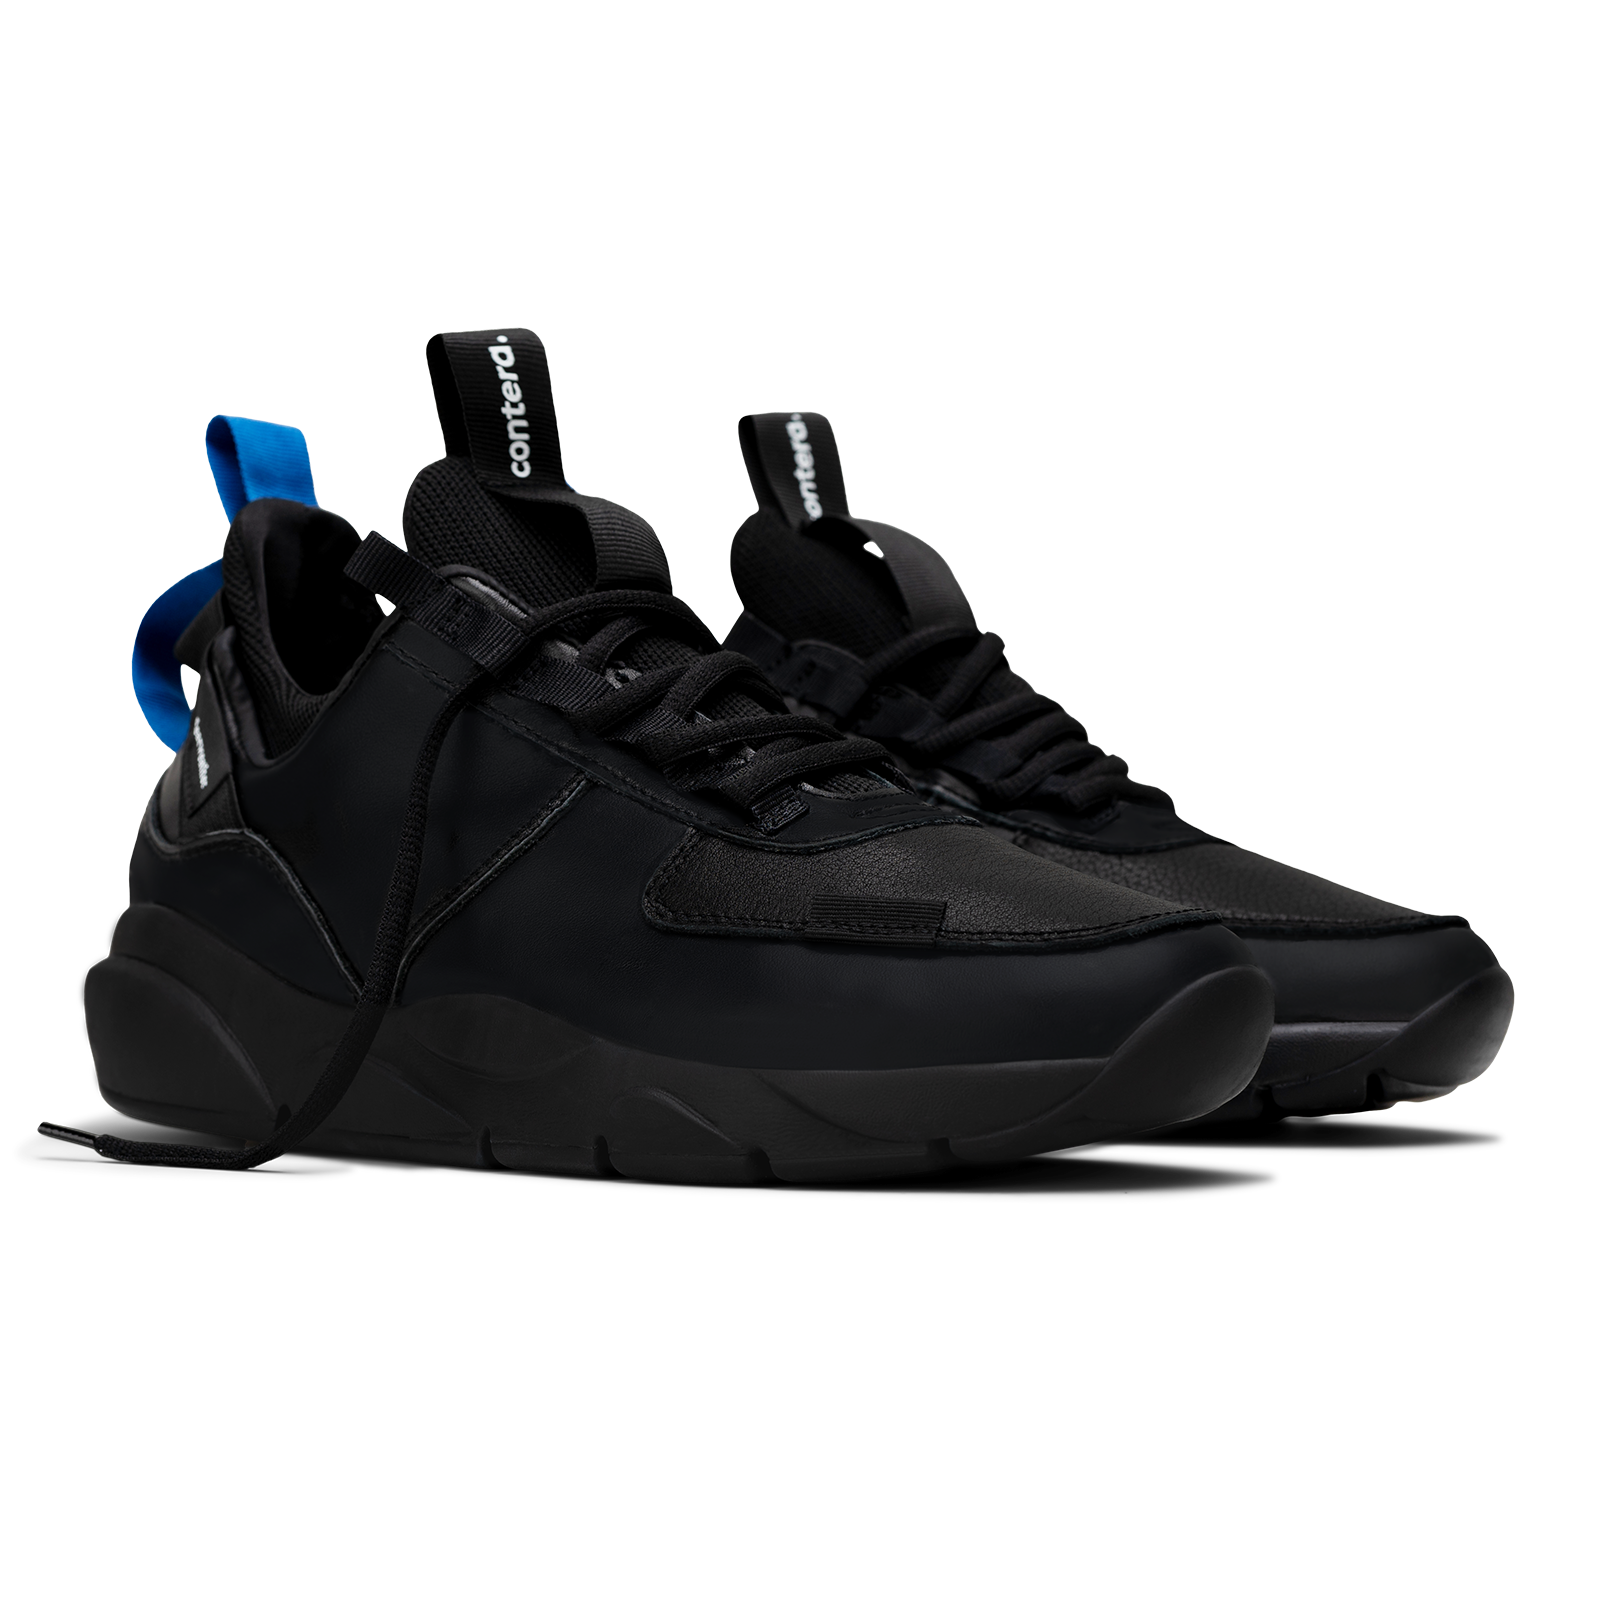 3/4 view,  Contera Black is a runner with Tumbled Black fullgrain leather overlays Black stretch mesh underlays, Royal Blue heel pull molded lace holder, Black eva midsole and Black rubber outsole.